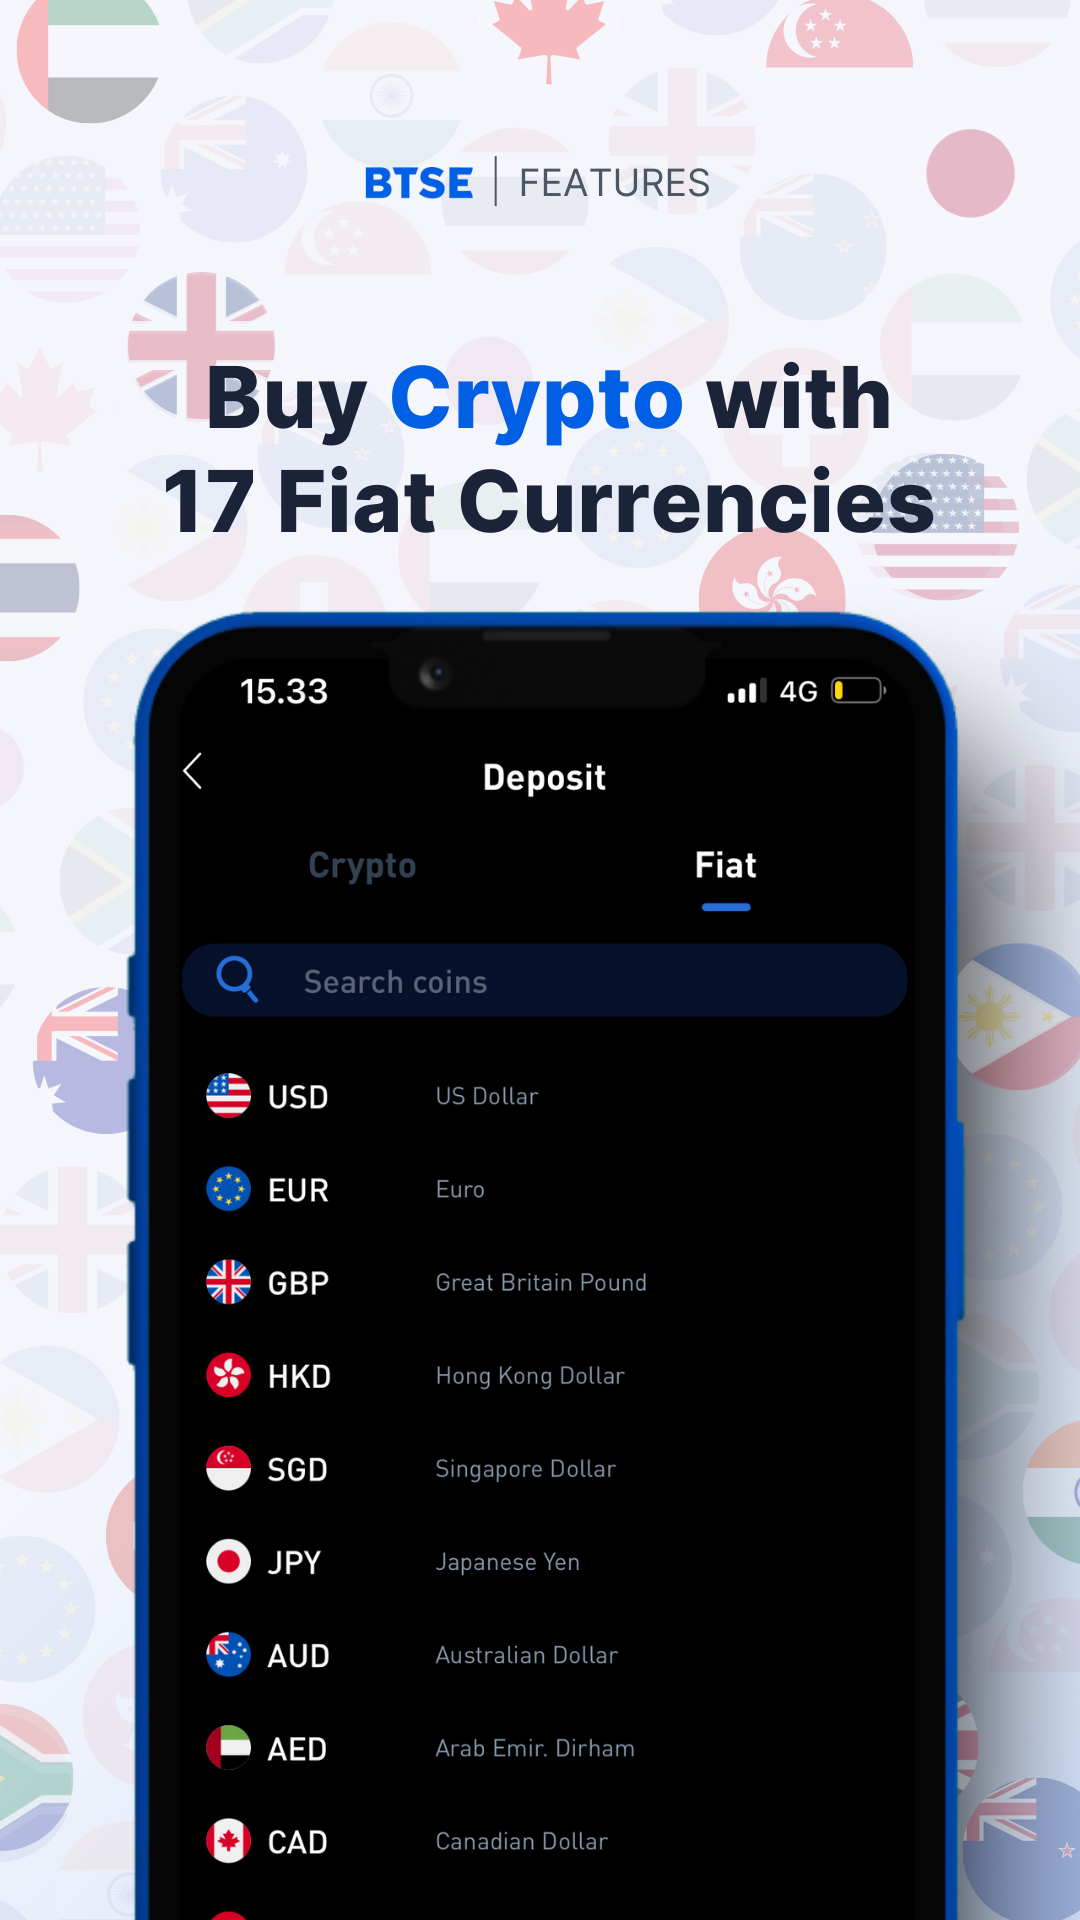 How many fiat currencies does BTSE support